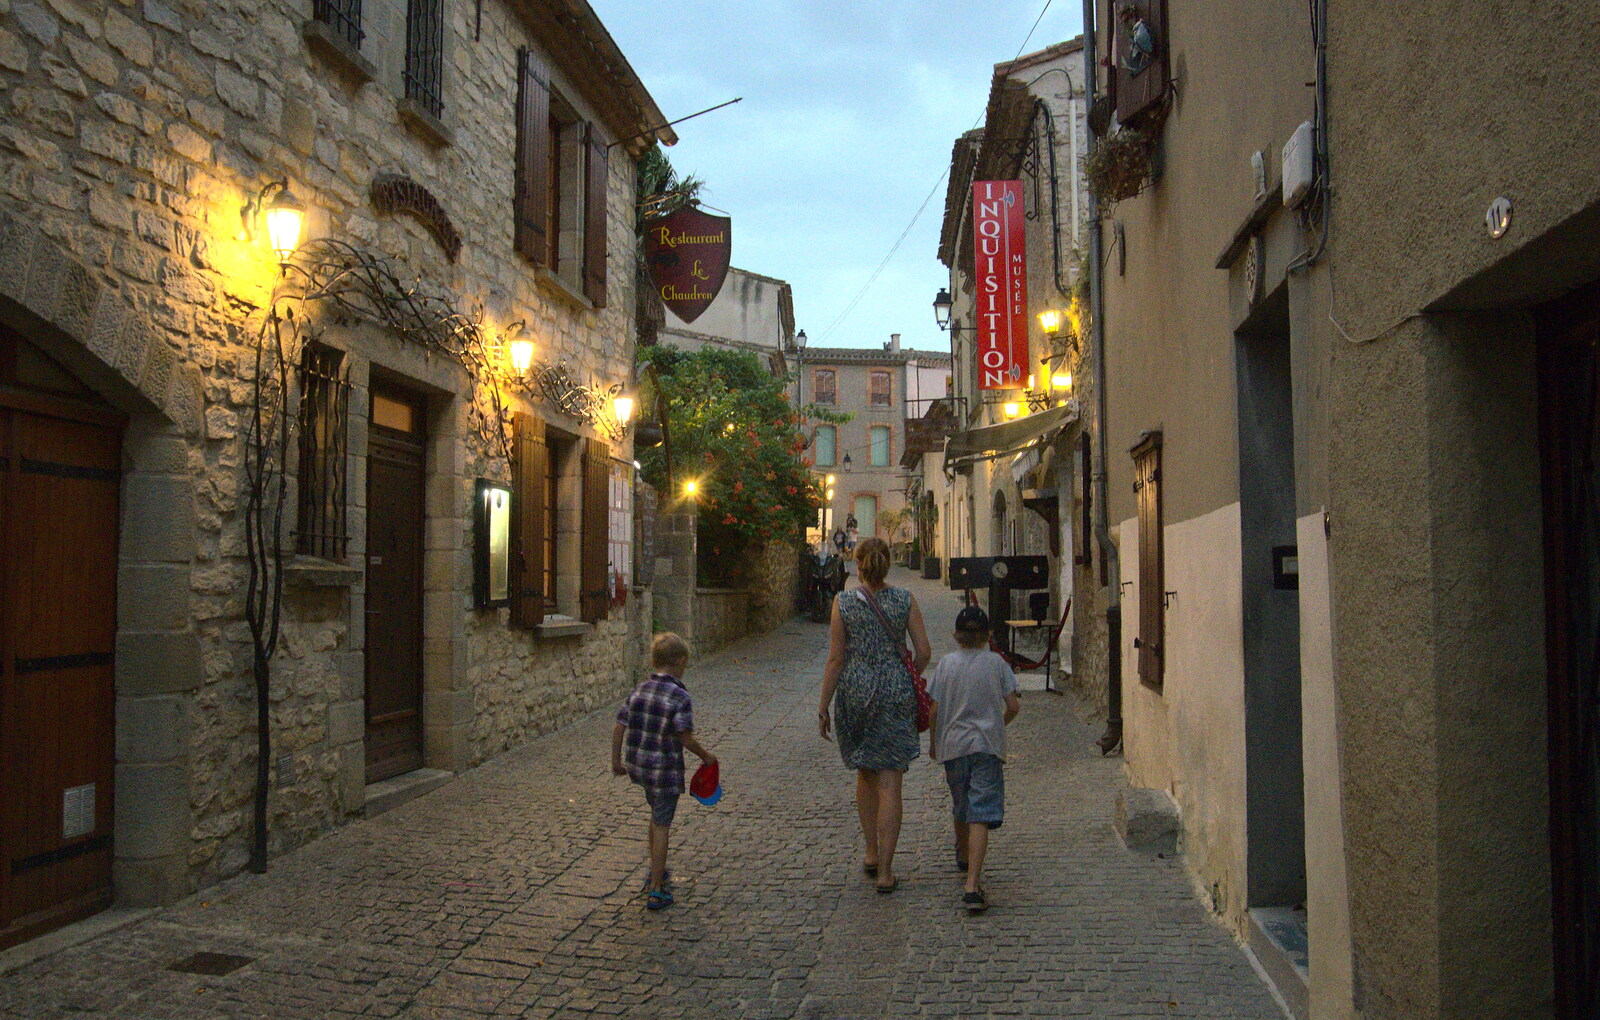 We wander around for a bit before it rains from A Trip to Carcassonne, Aude, France - 8th August 2018